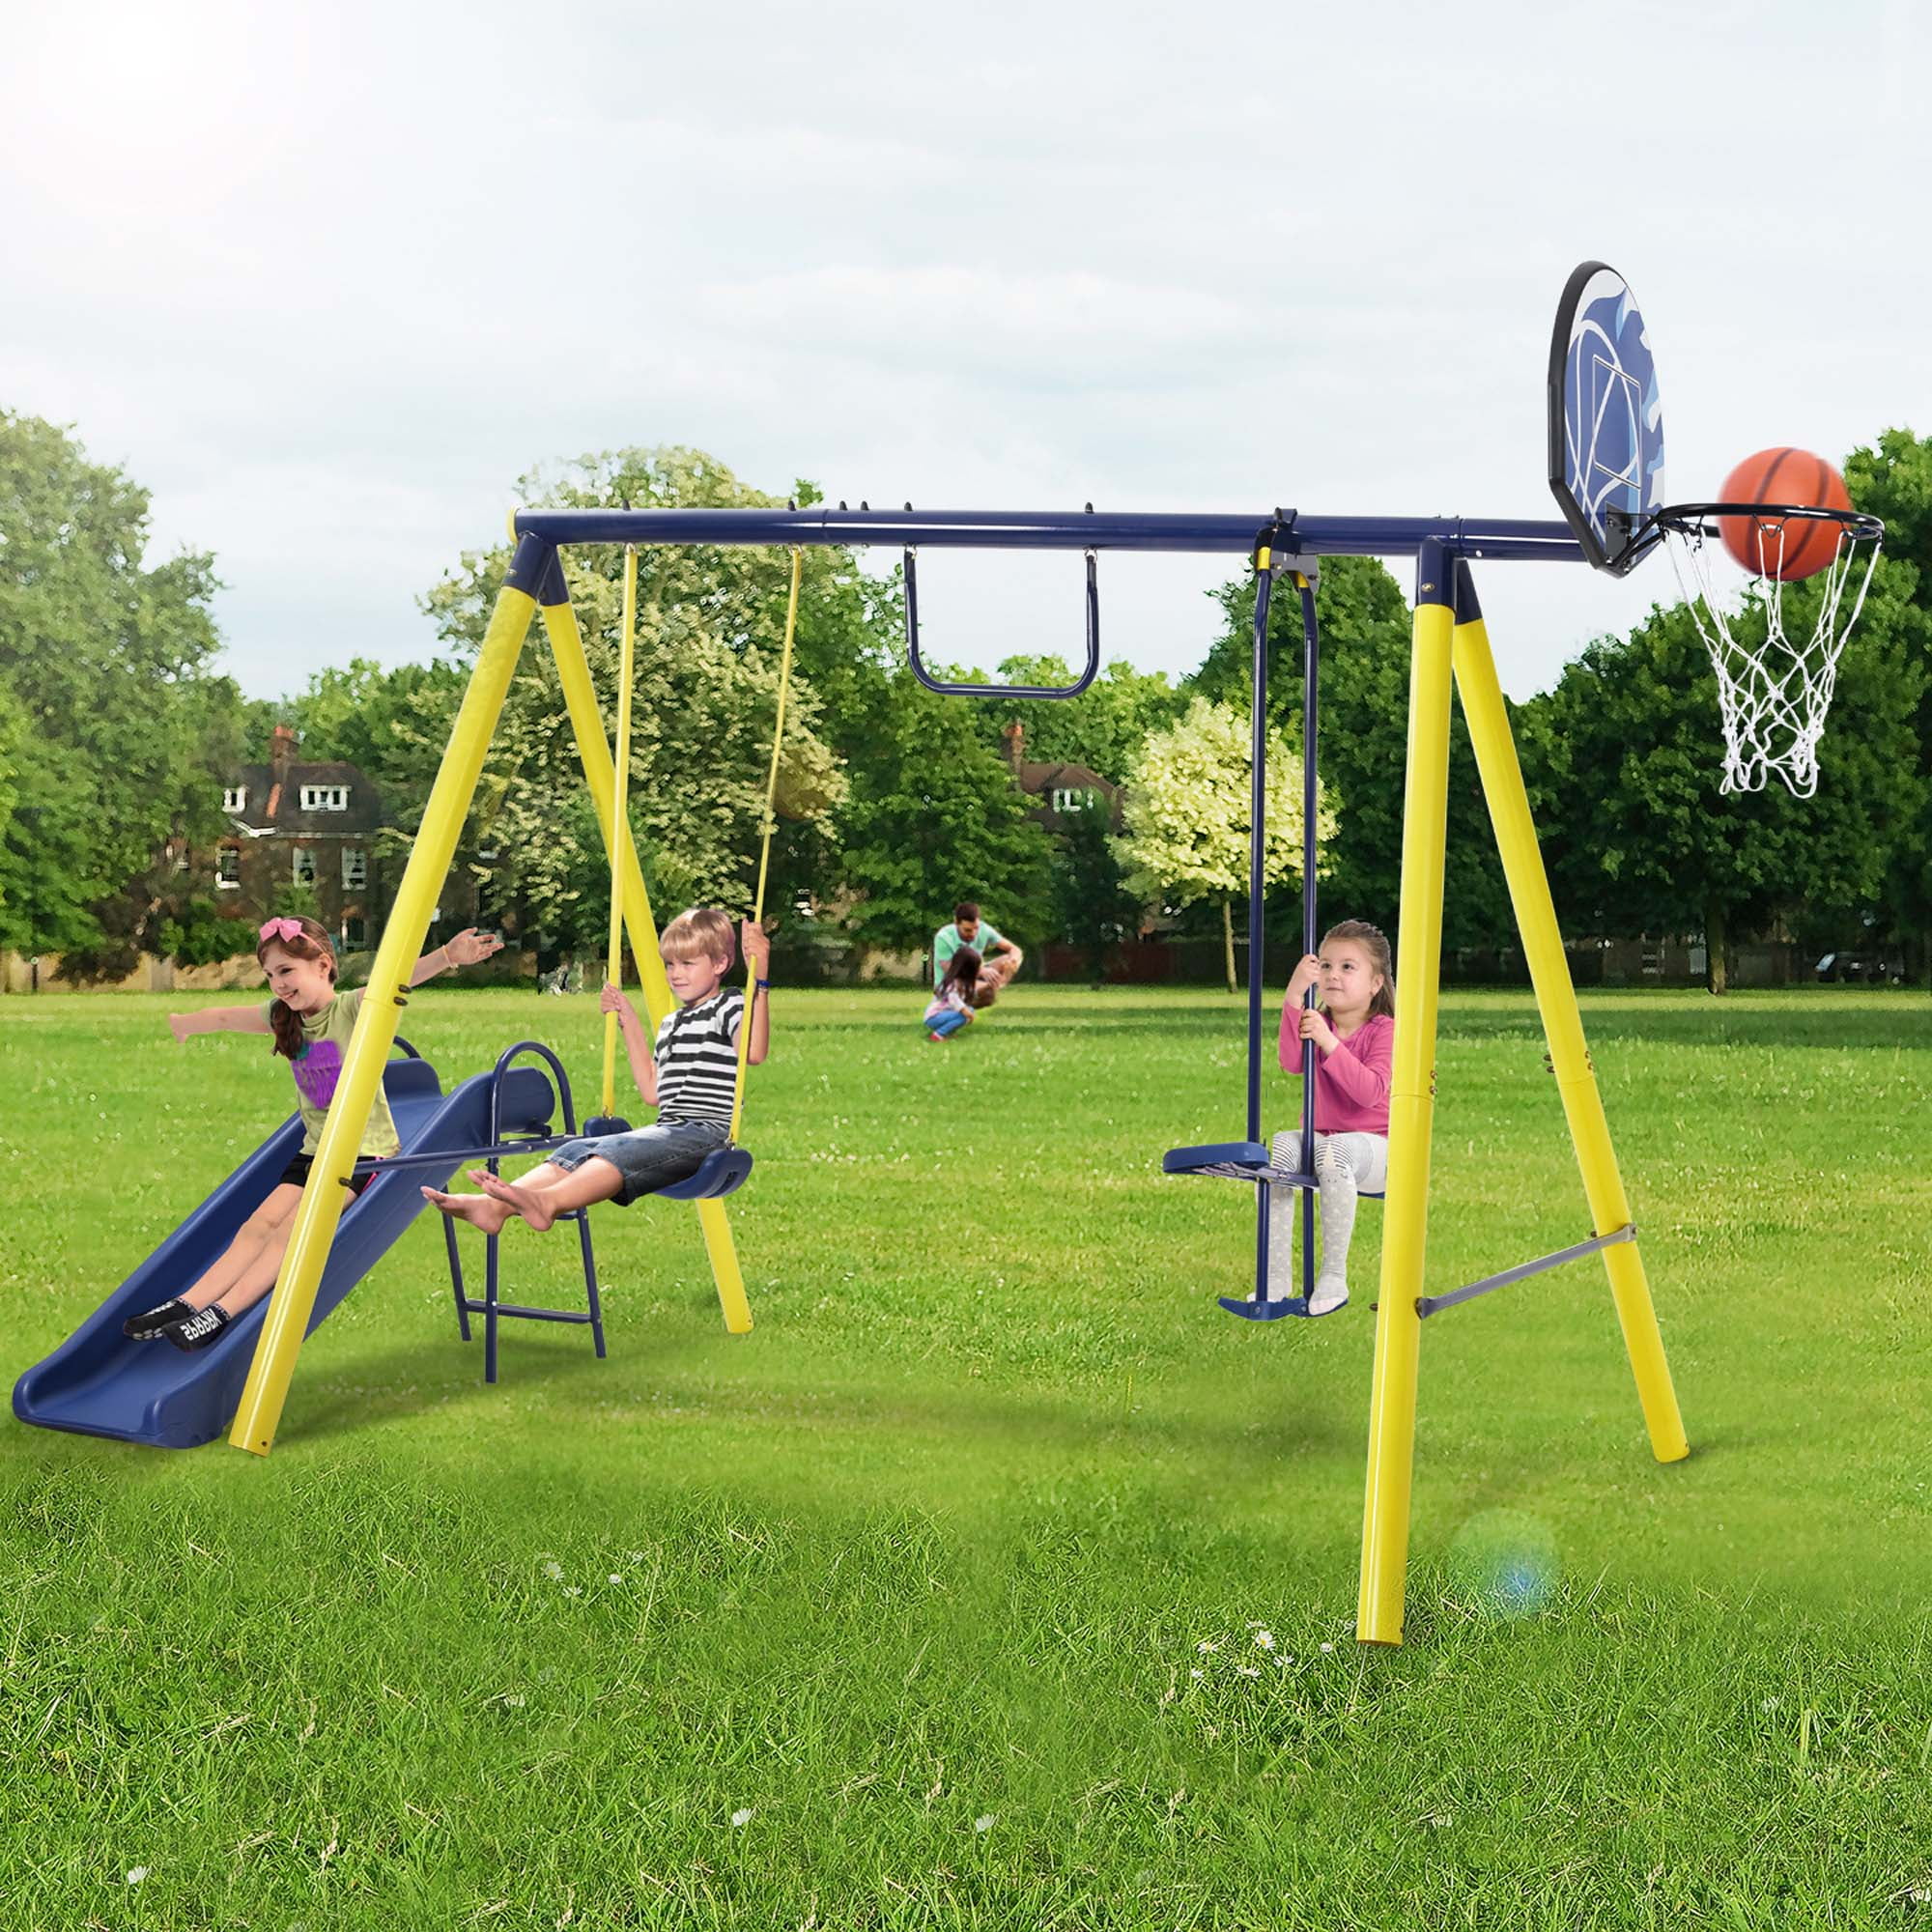 Large Garden Kids Swings Outdoor Seasaw Childrens Activity Playground Toy Set 